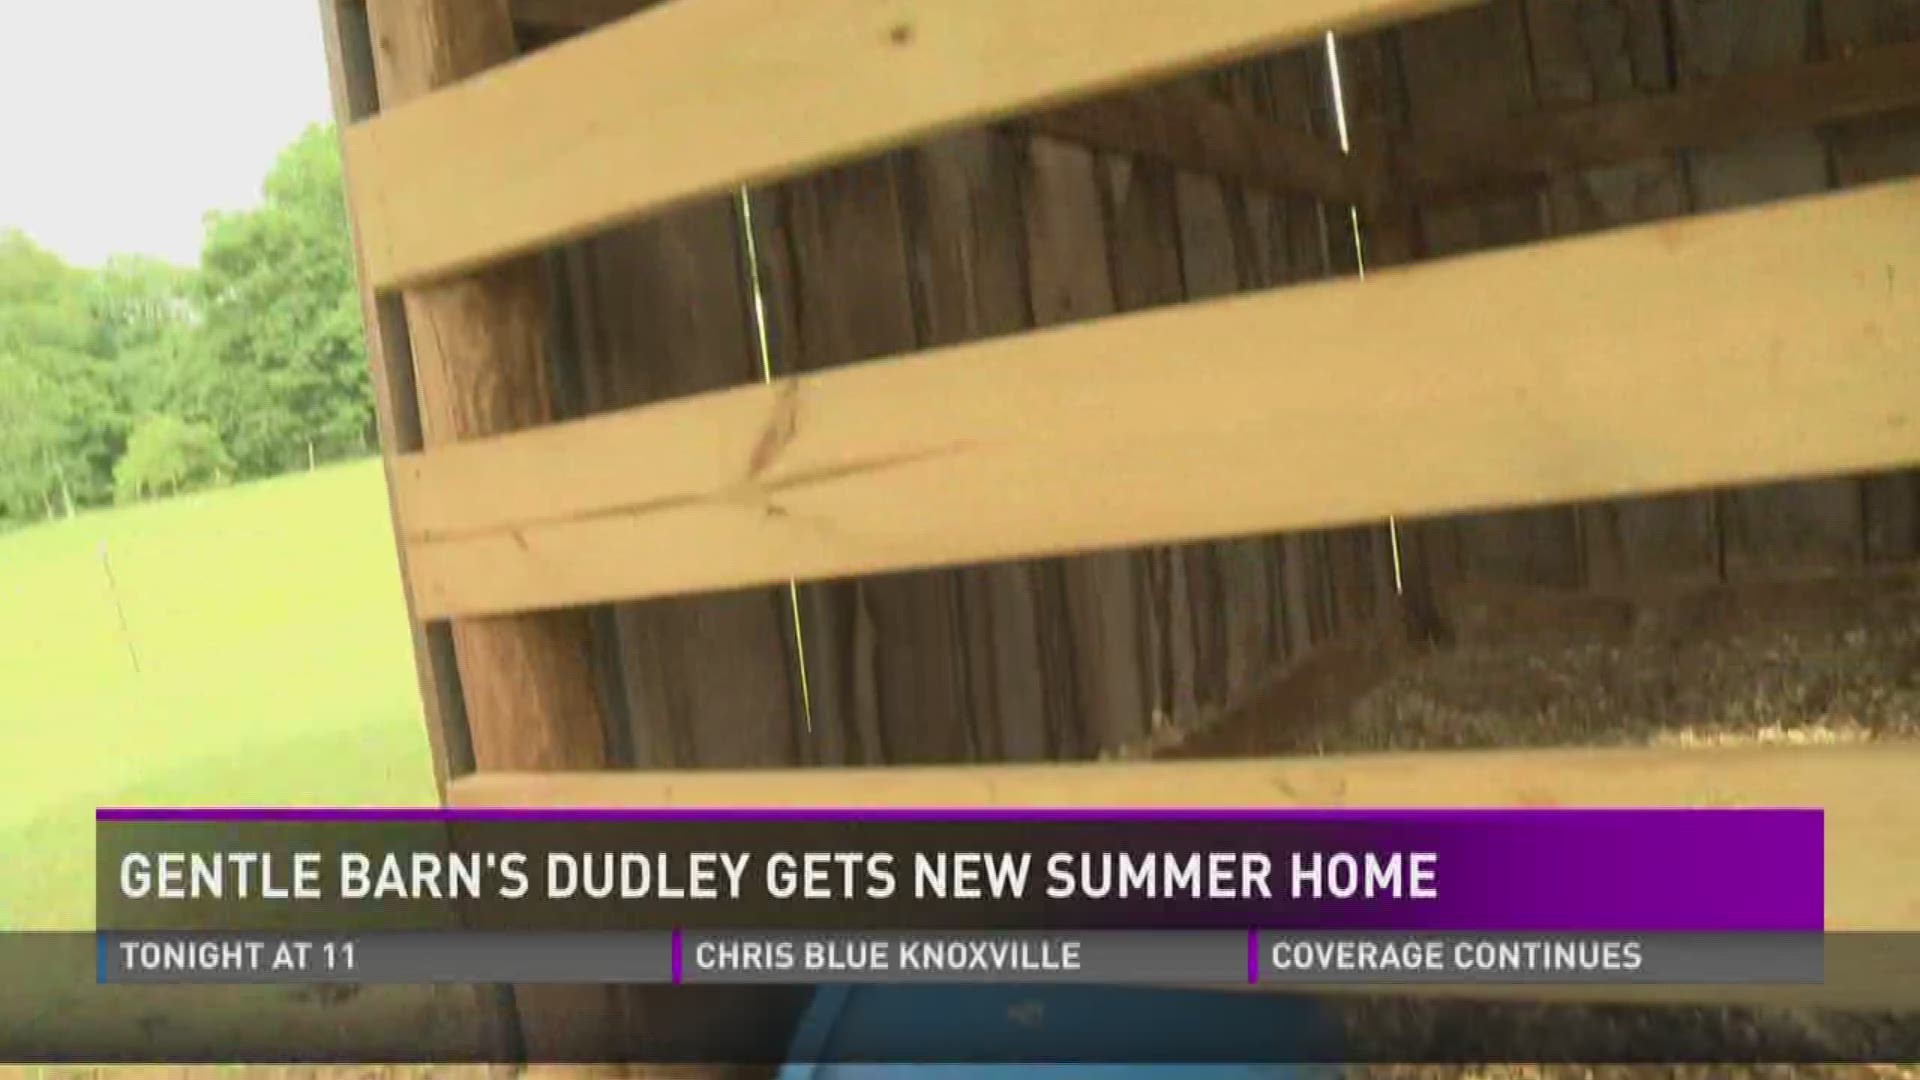 Dudley the Steer will soon have a new outdoor pen tailored to his disability.